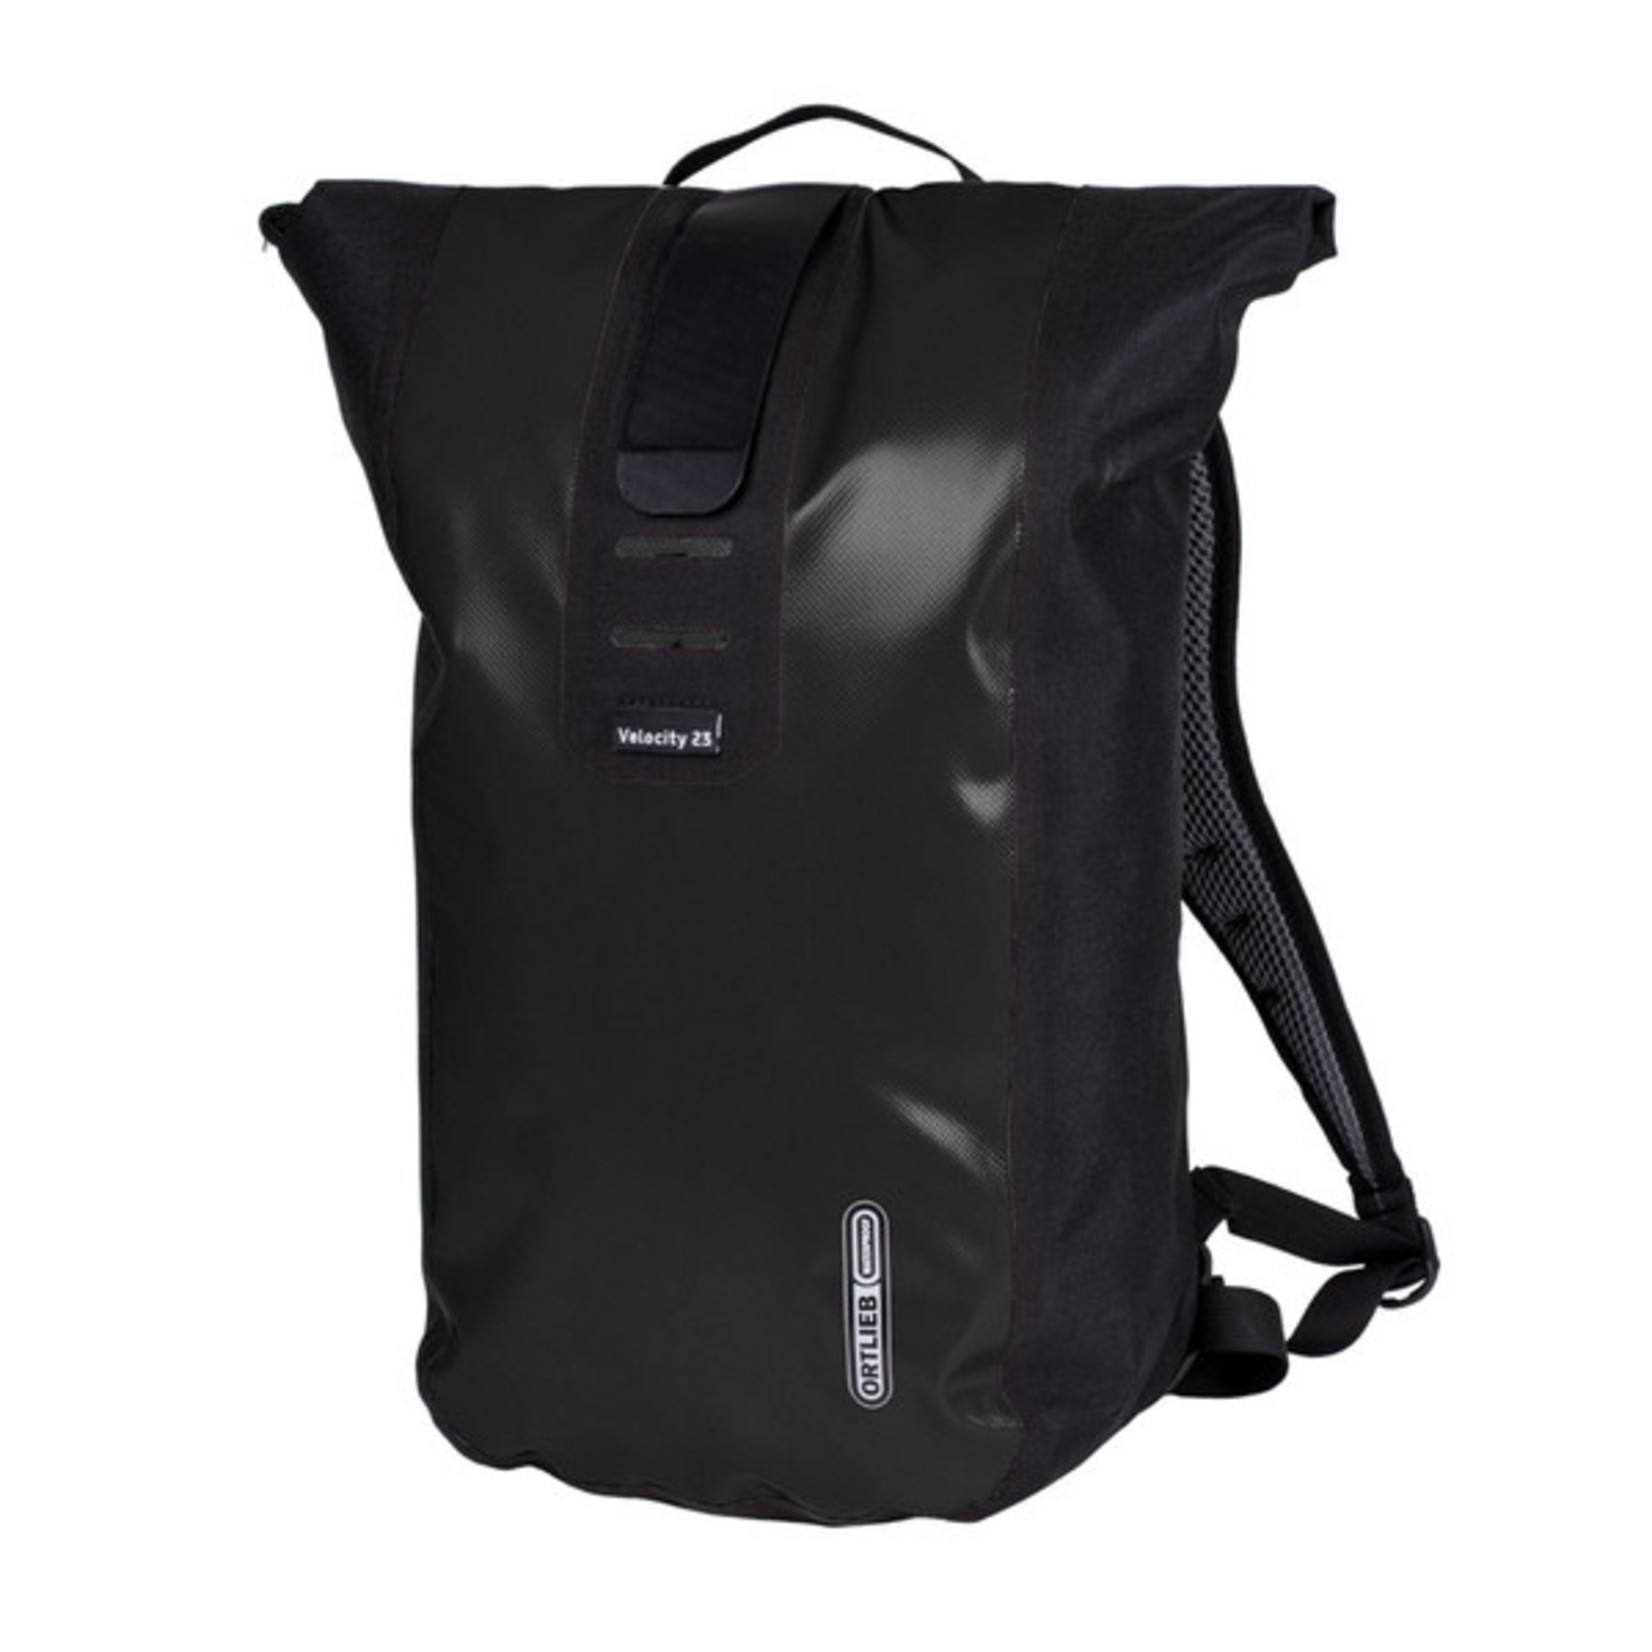 Ortlieb New Ortlieb Velocity Courier-Style Backpack R4300 - 17L - Black